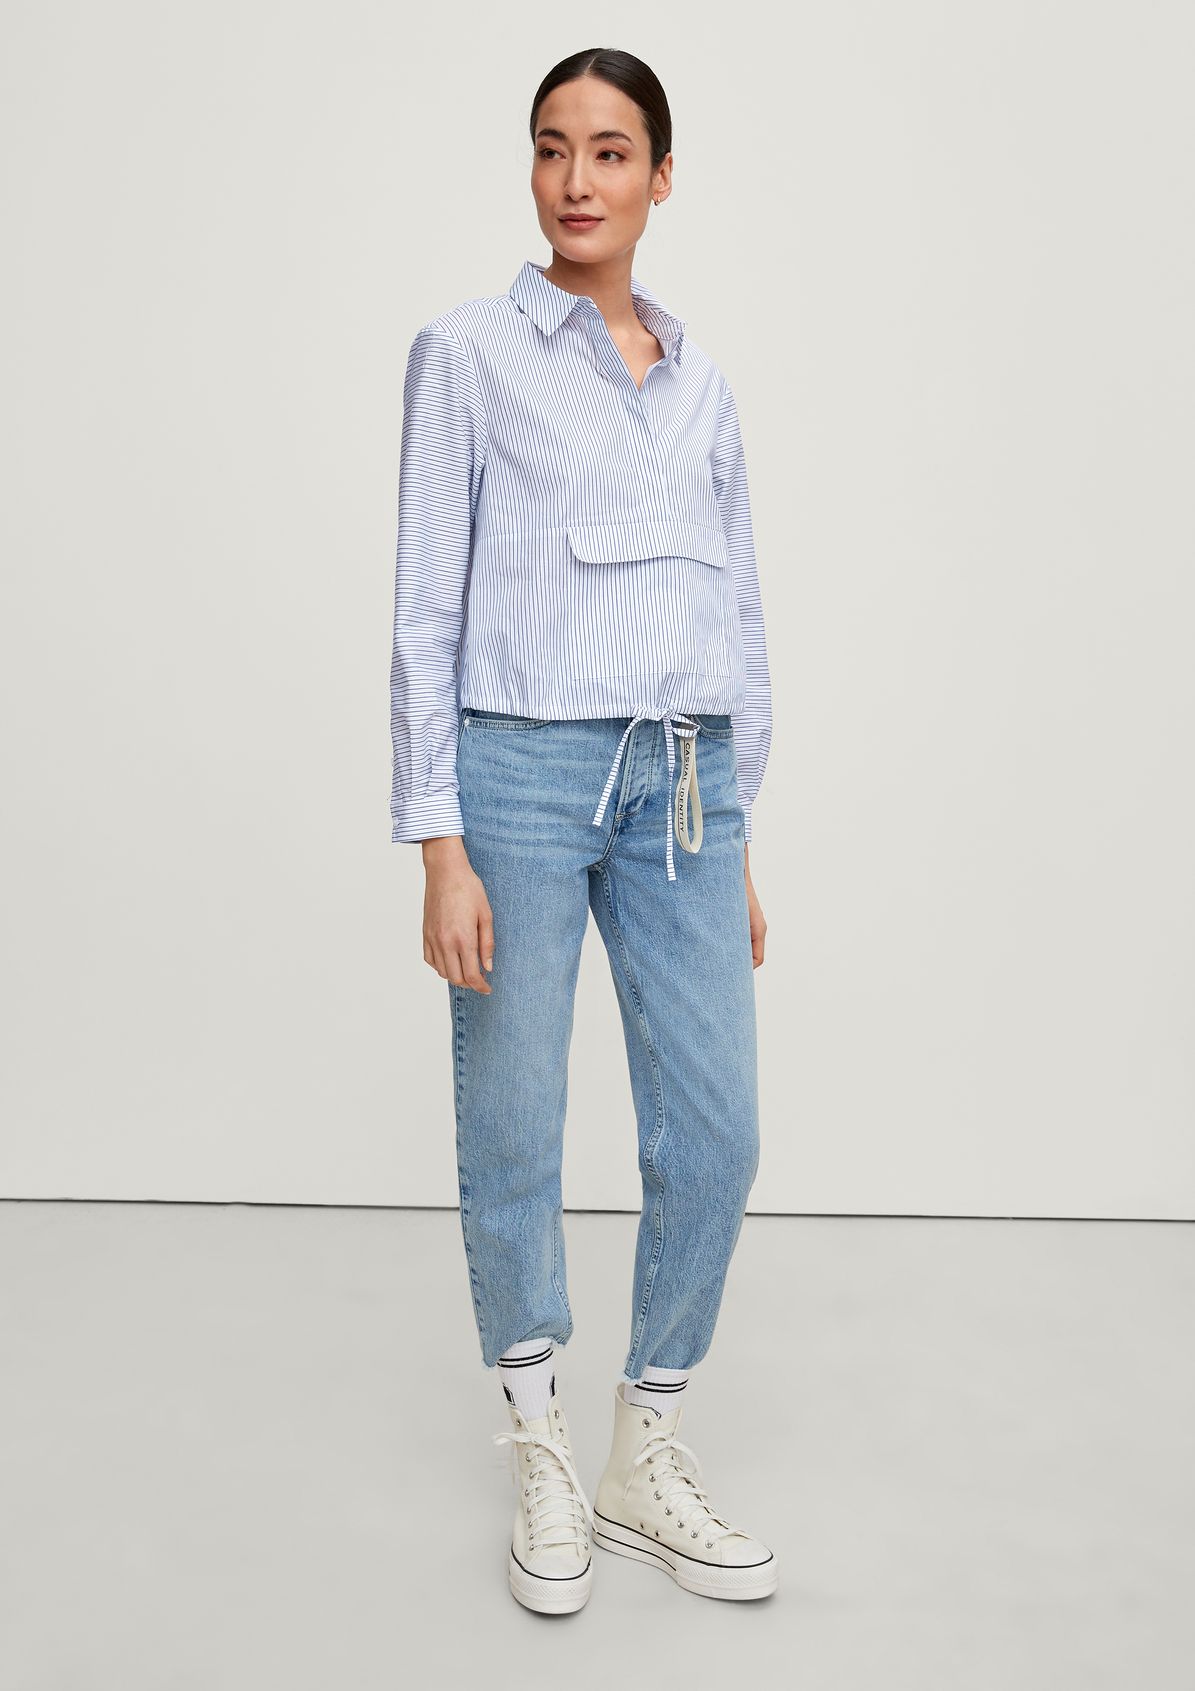 Cotton blouse with a striped pattern from comma